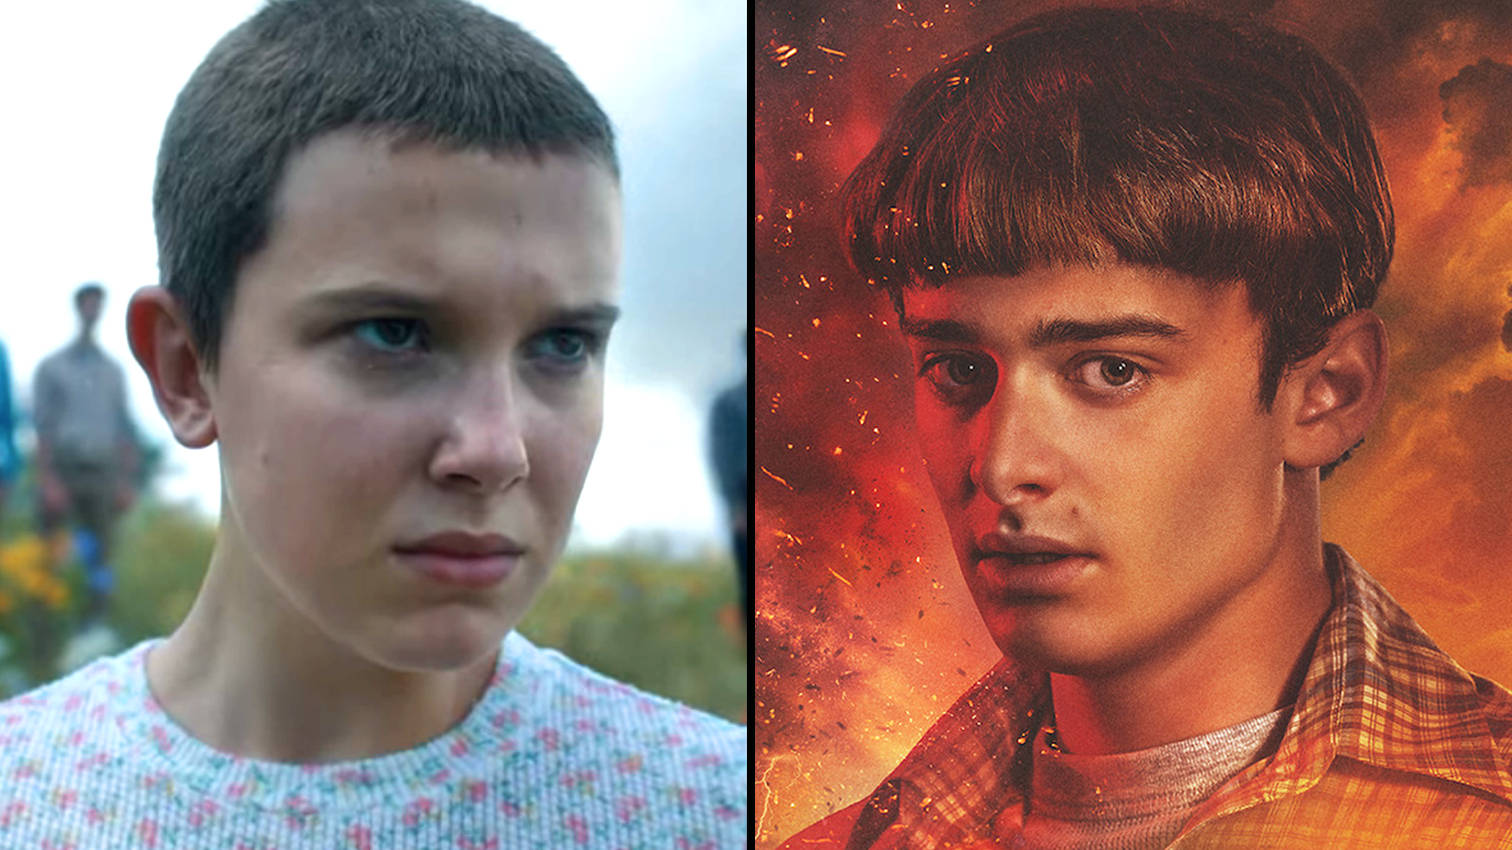 Will Byers to play central role in Stranger Things season 5